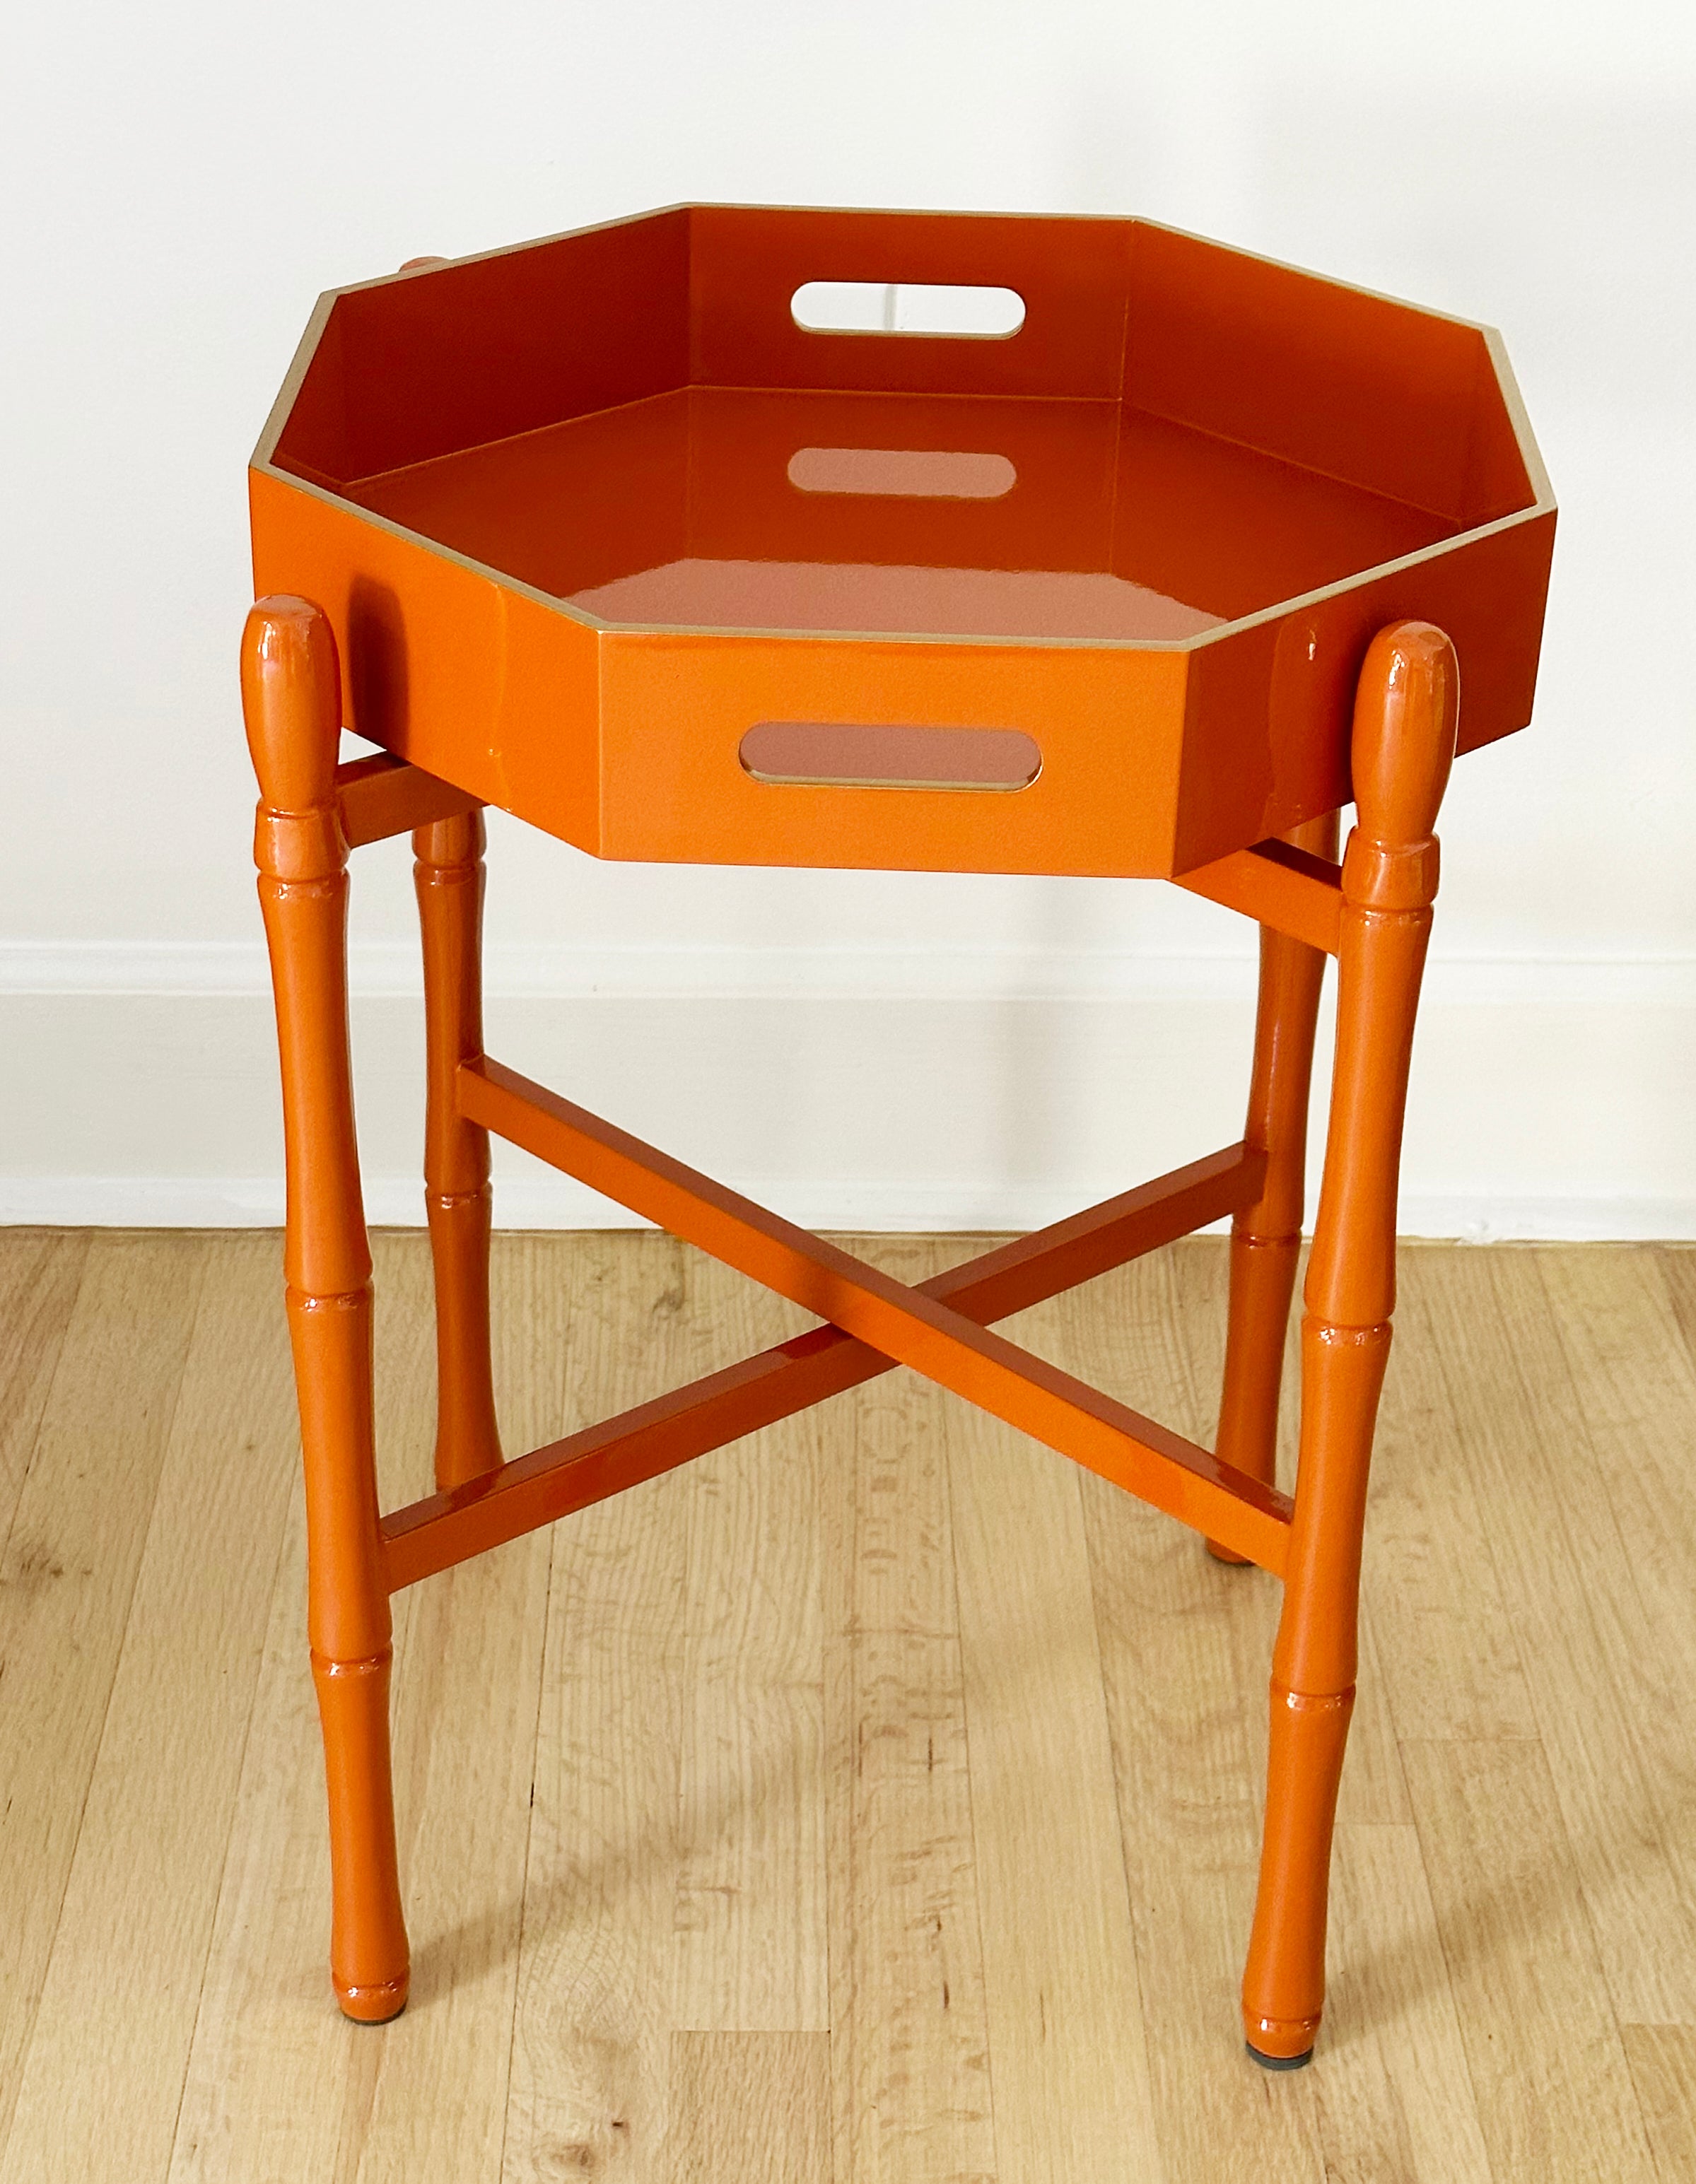 OCTAGONAL LACQUER TRAY TABLE PAPRIKA